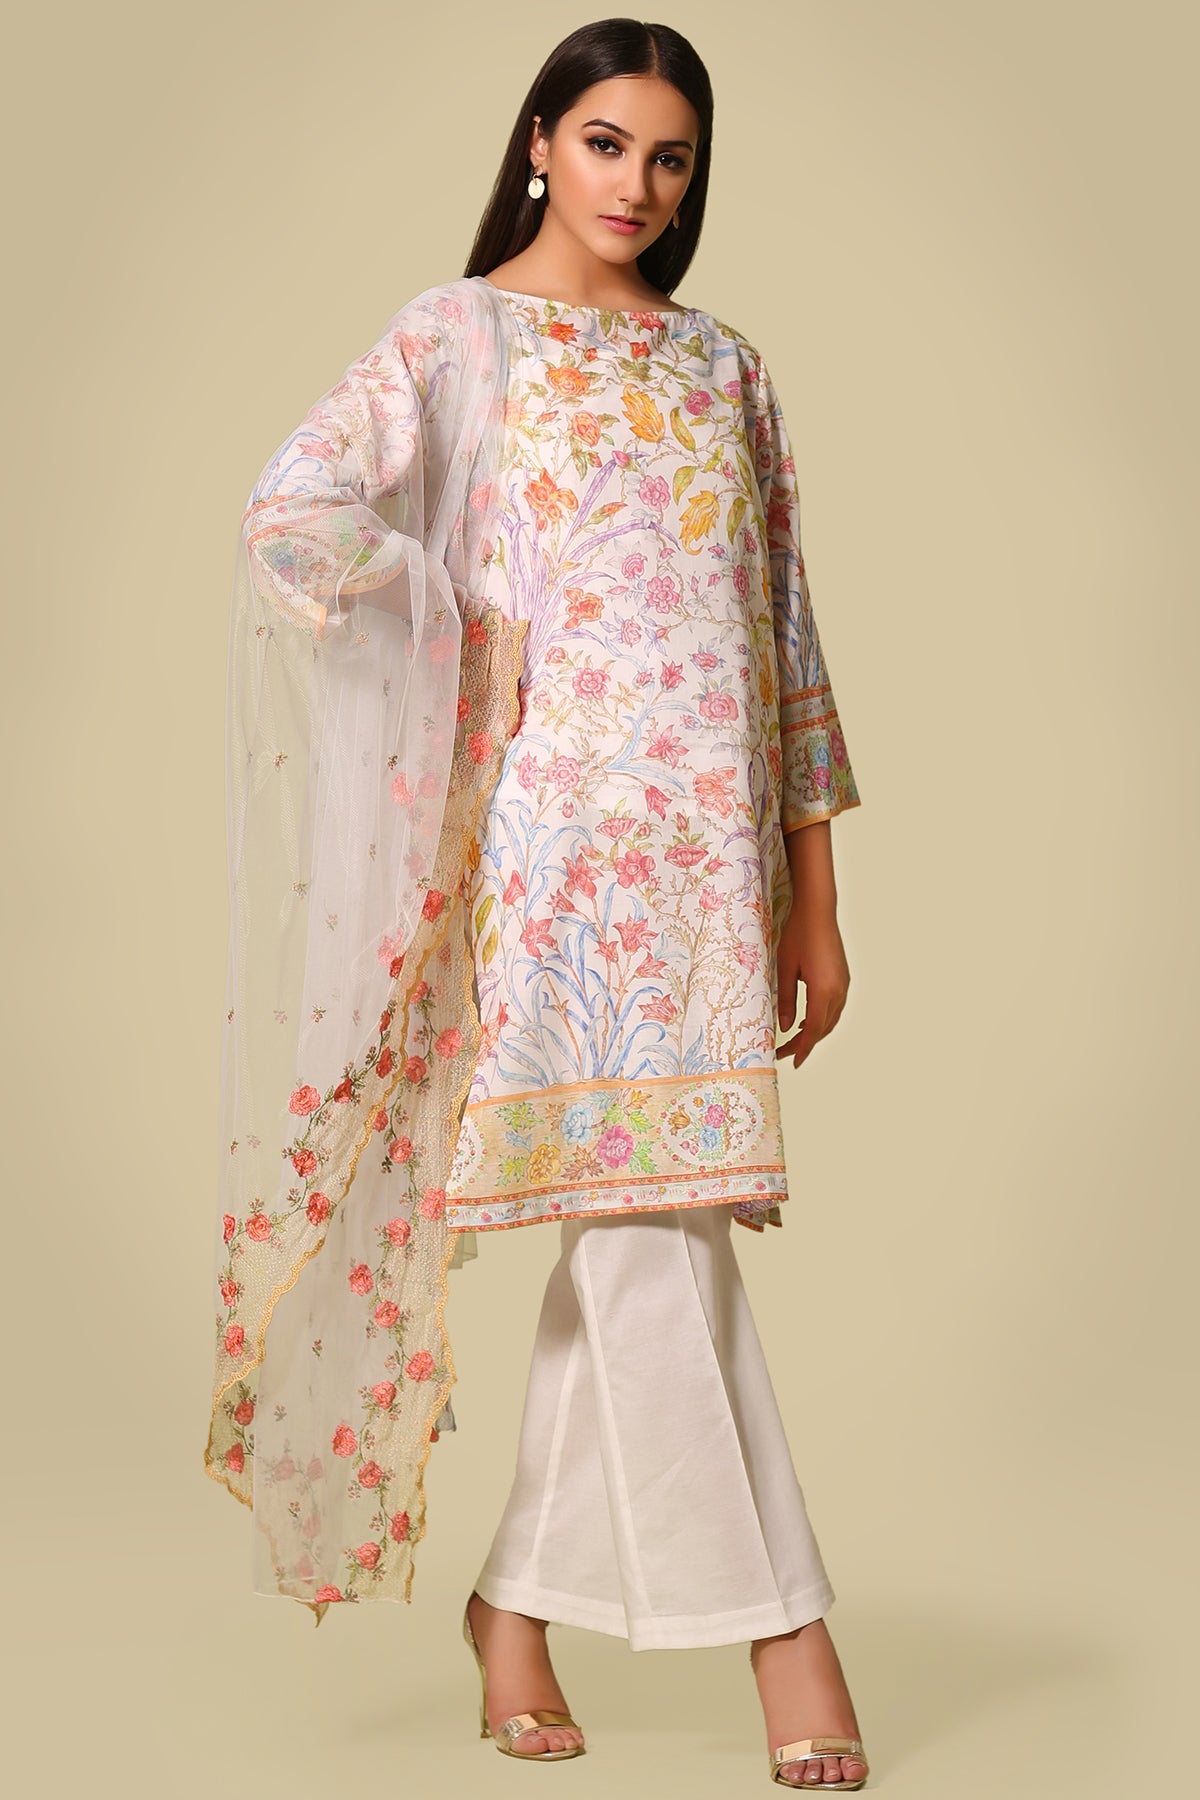 Printed & Embroidered suit